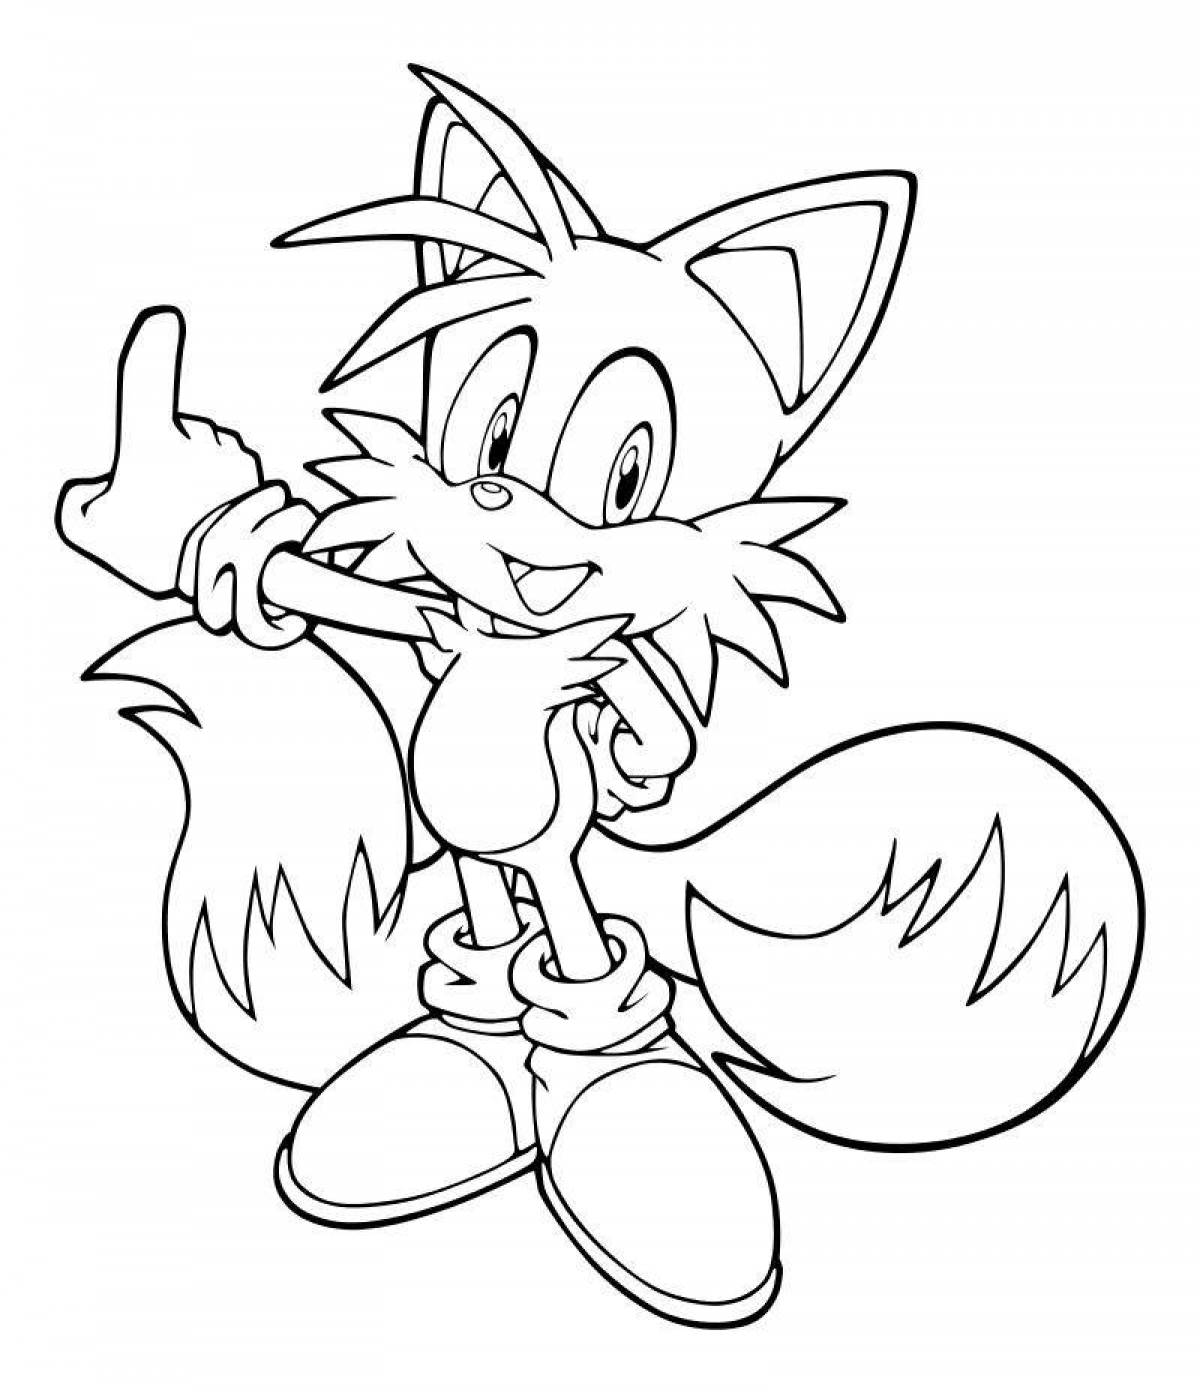 Colorful sonic and tails coloring page